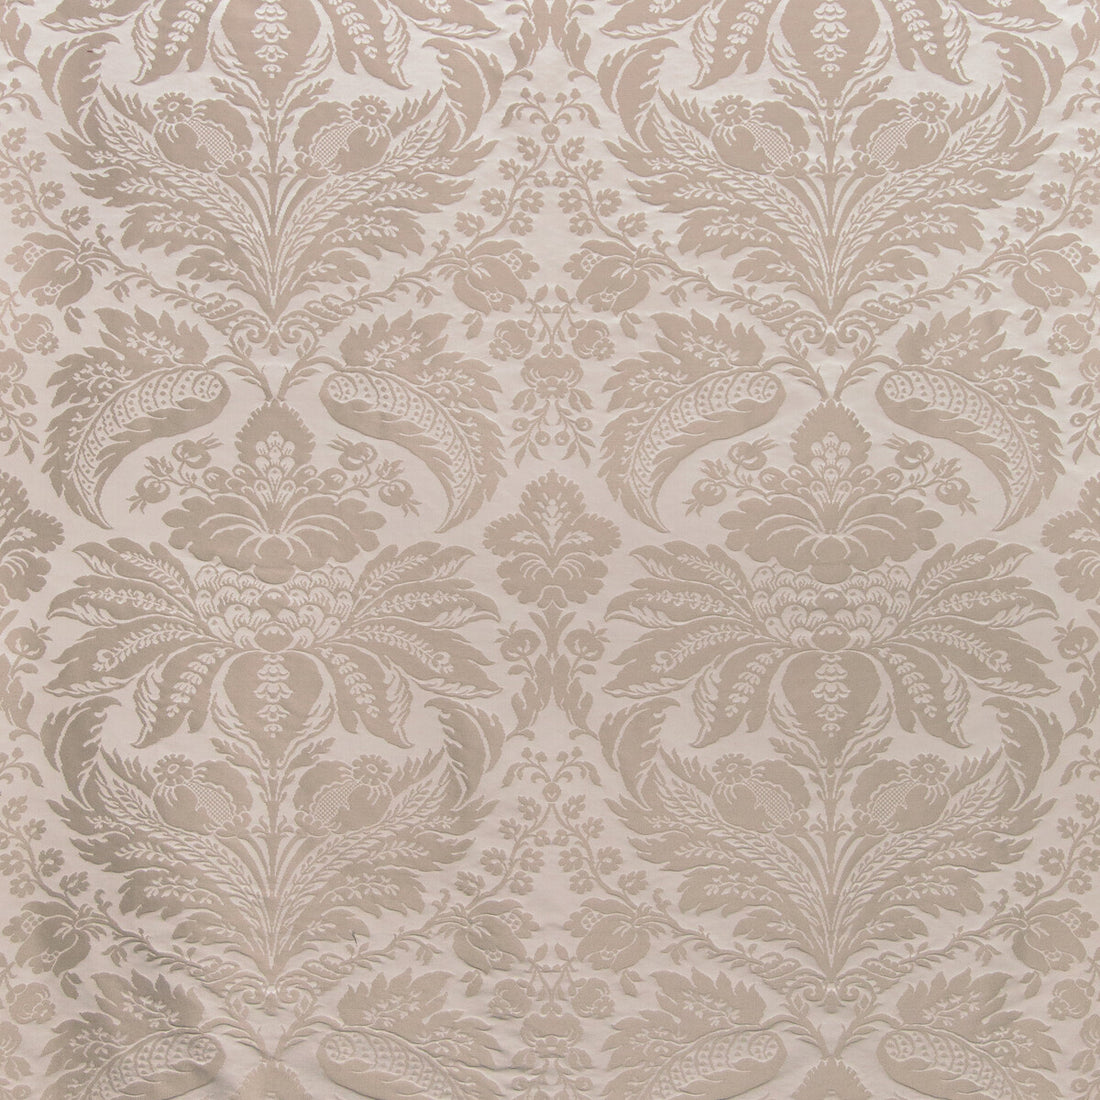 Damask Pierre fabric in grey color - pattern 8013188.11.0 - by Brunschwig &amp; Fils in the B&amp;F Showroom Exclusive 2019 collection